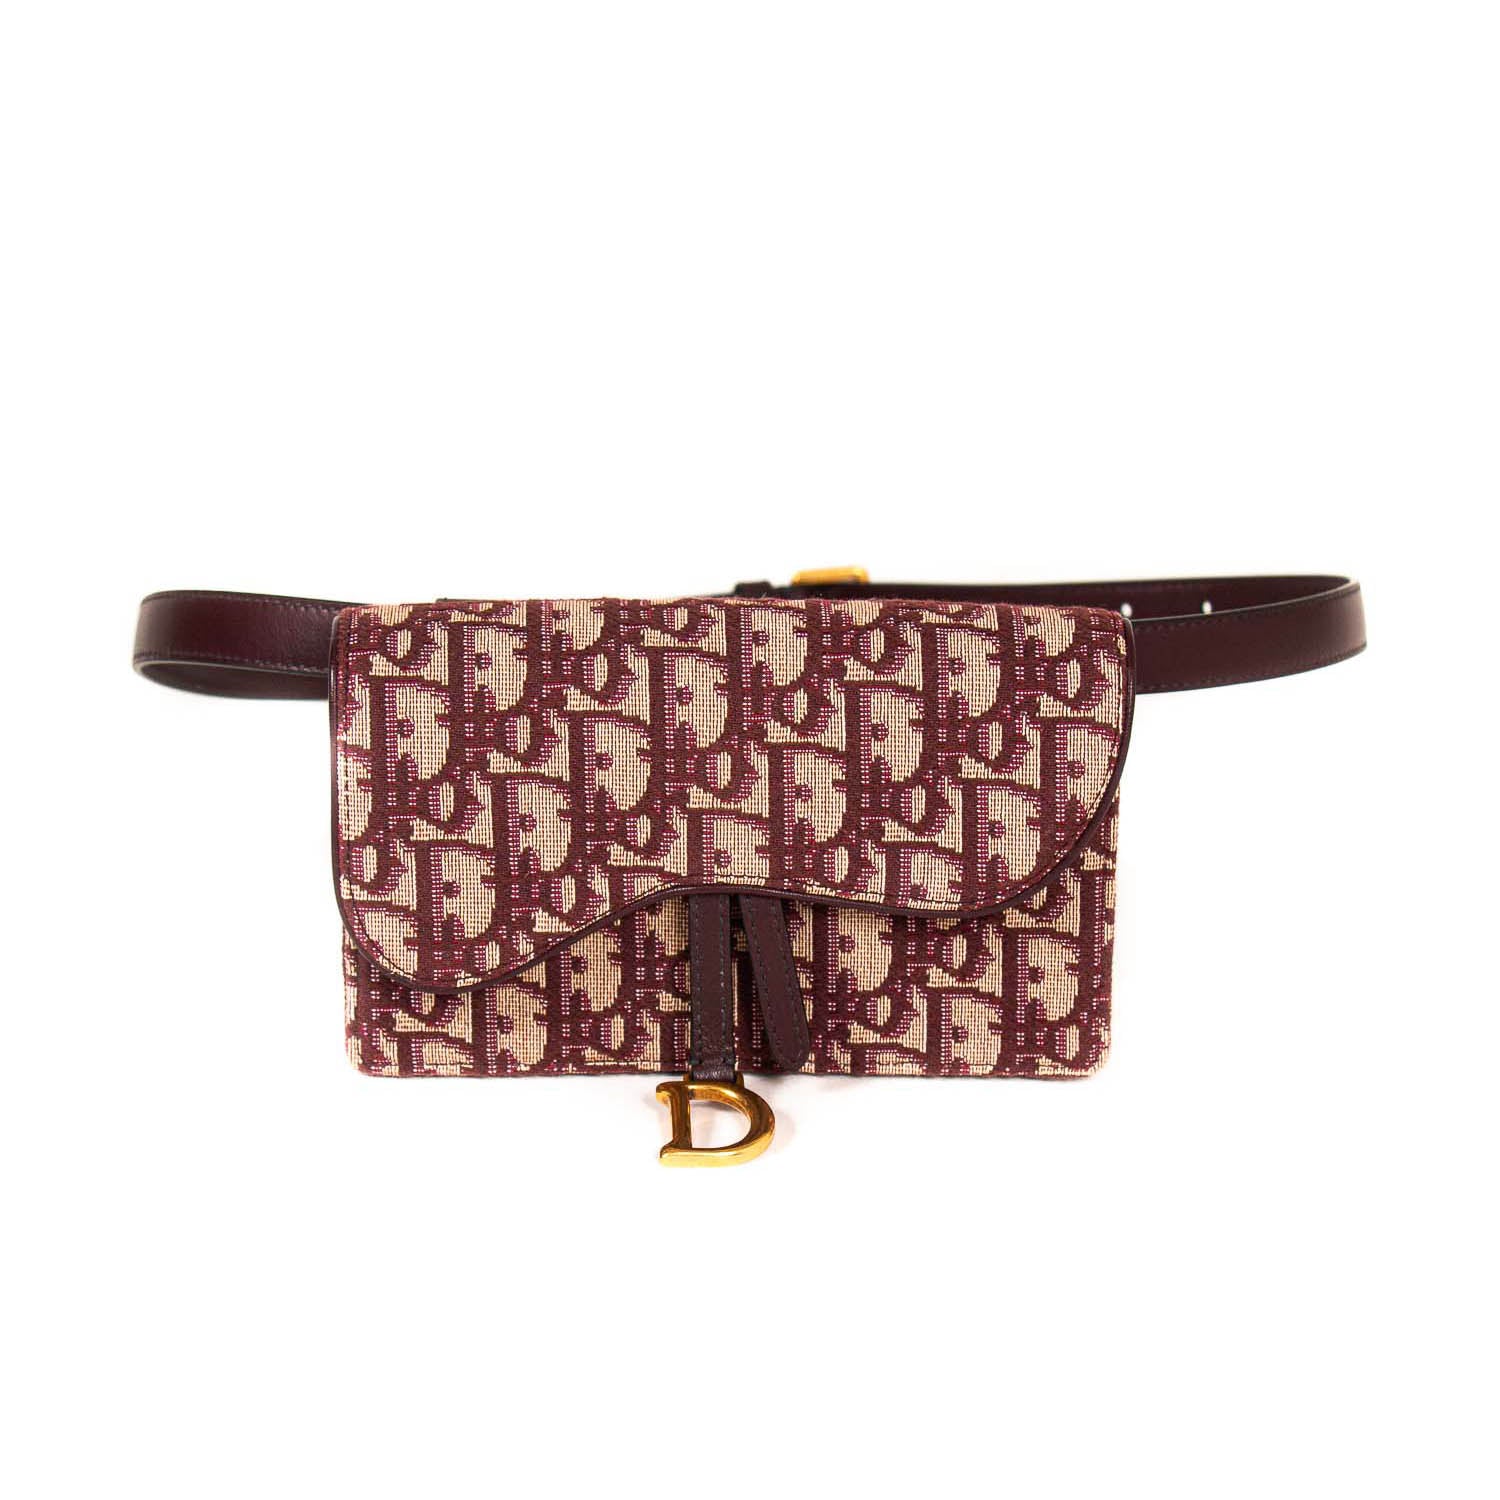 Shop authentic Christian Dior Saddle Belt Pouch at revogue for just USD ...